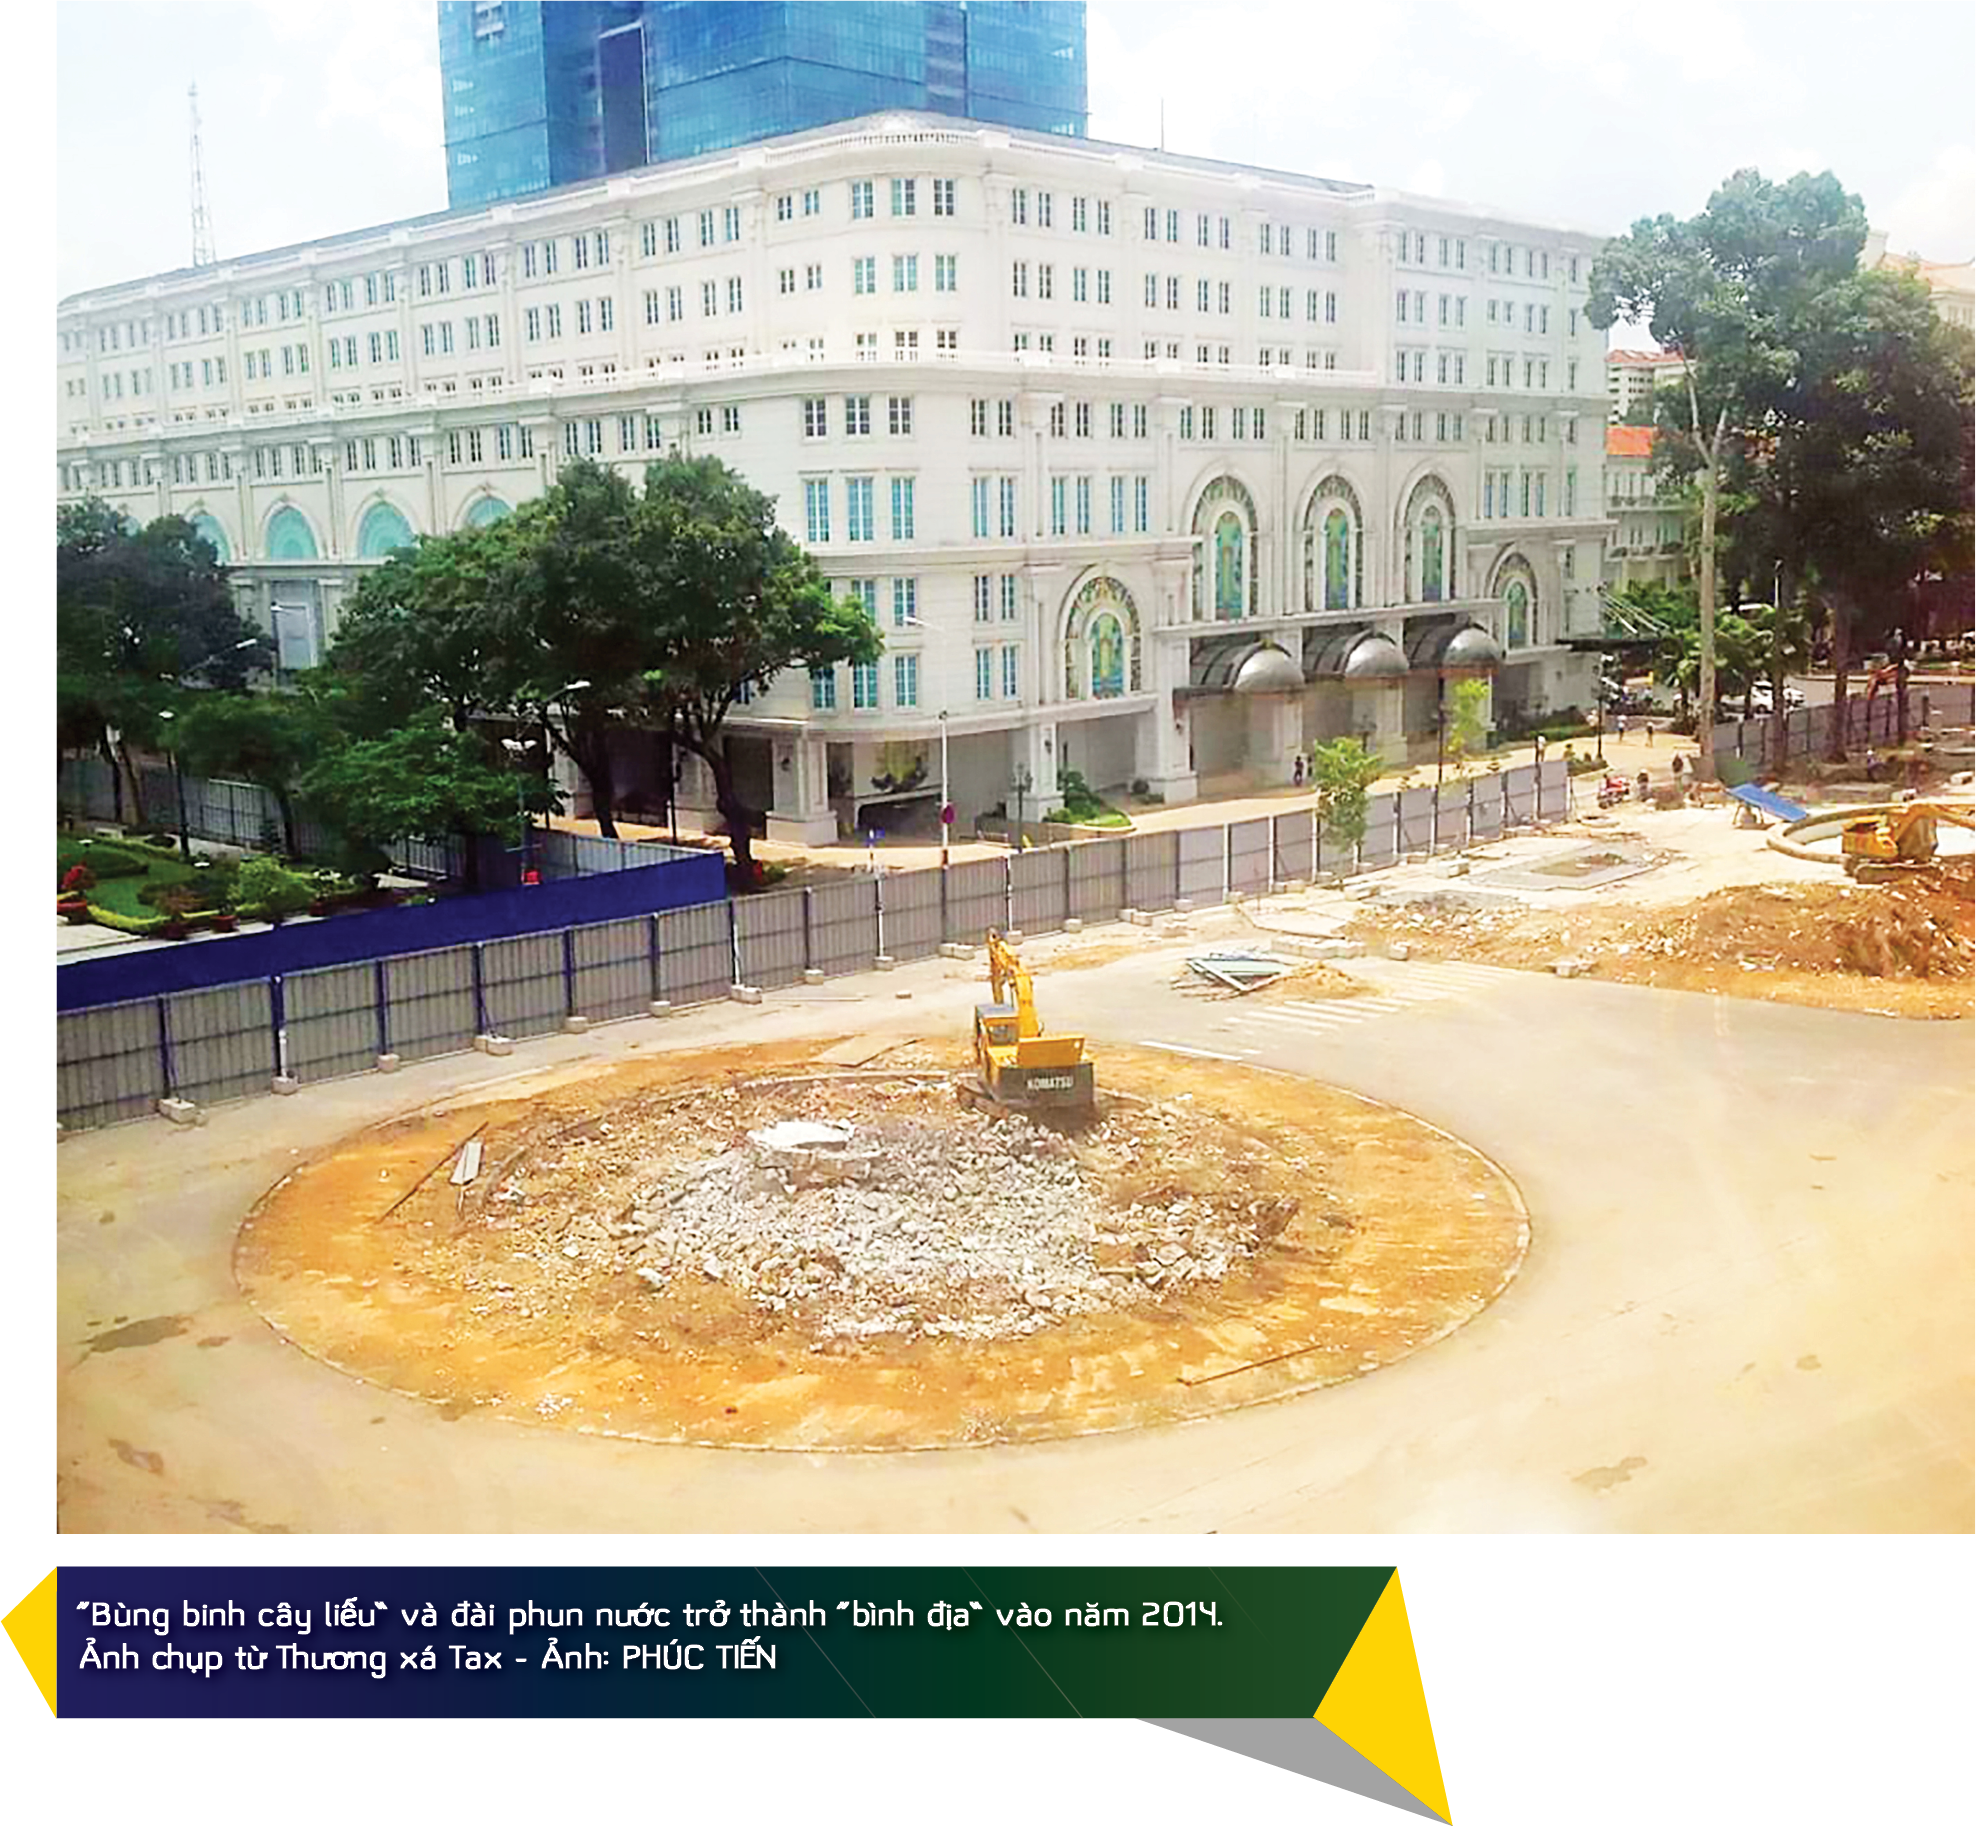 In 2014, the Willow Roundabout was flattened to make way for the construction of a metro system in Ho Chi Minh City. Photo: Phuc Tien / Tuoi Tre